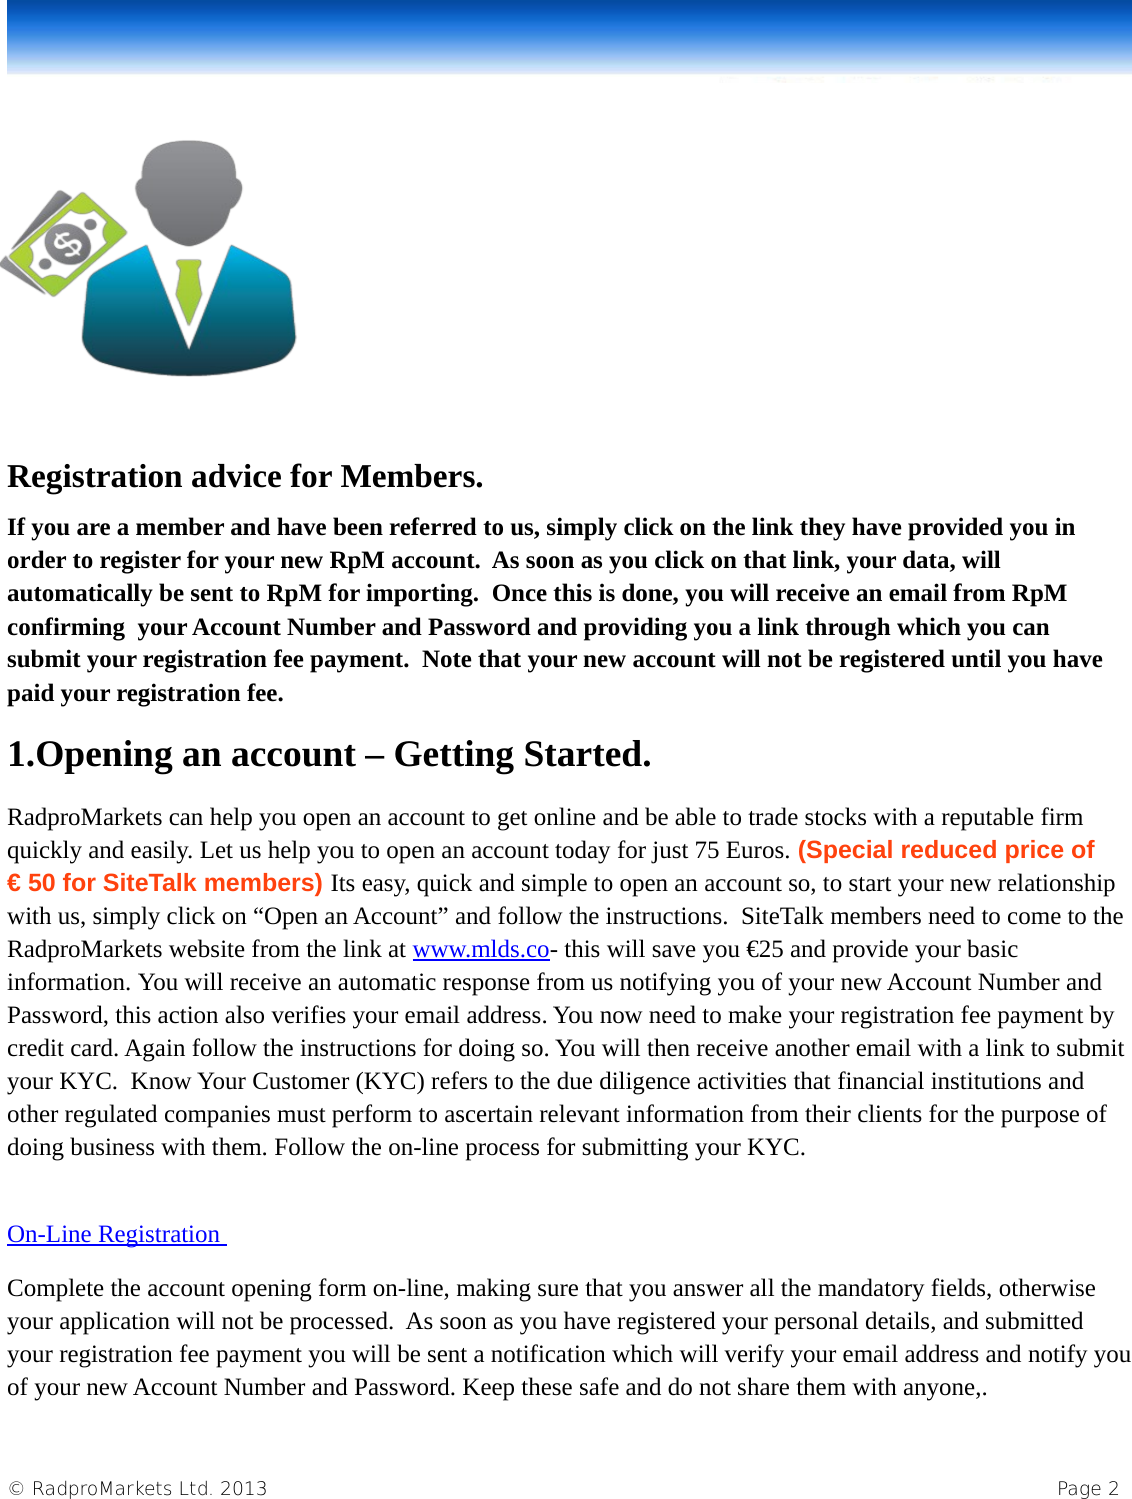 Page 2 of 8 - Users-Guide-RPM